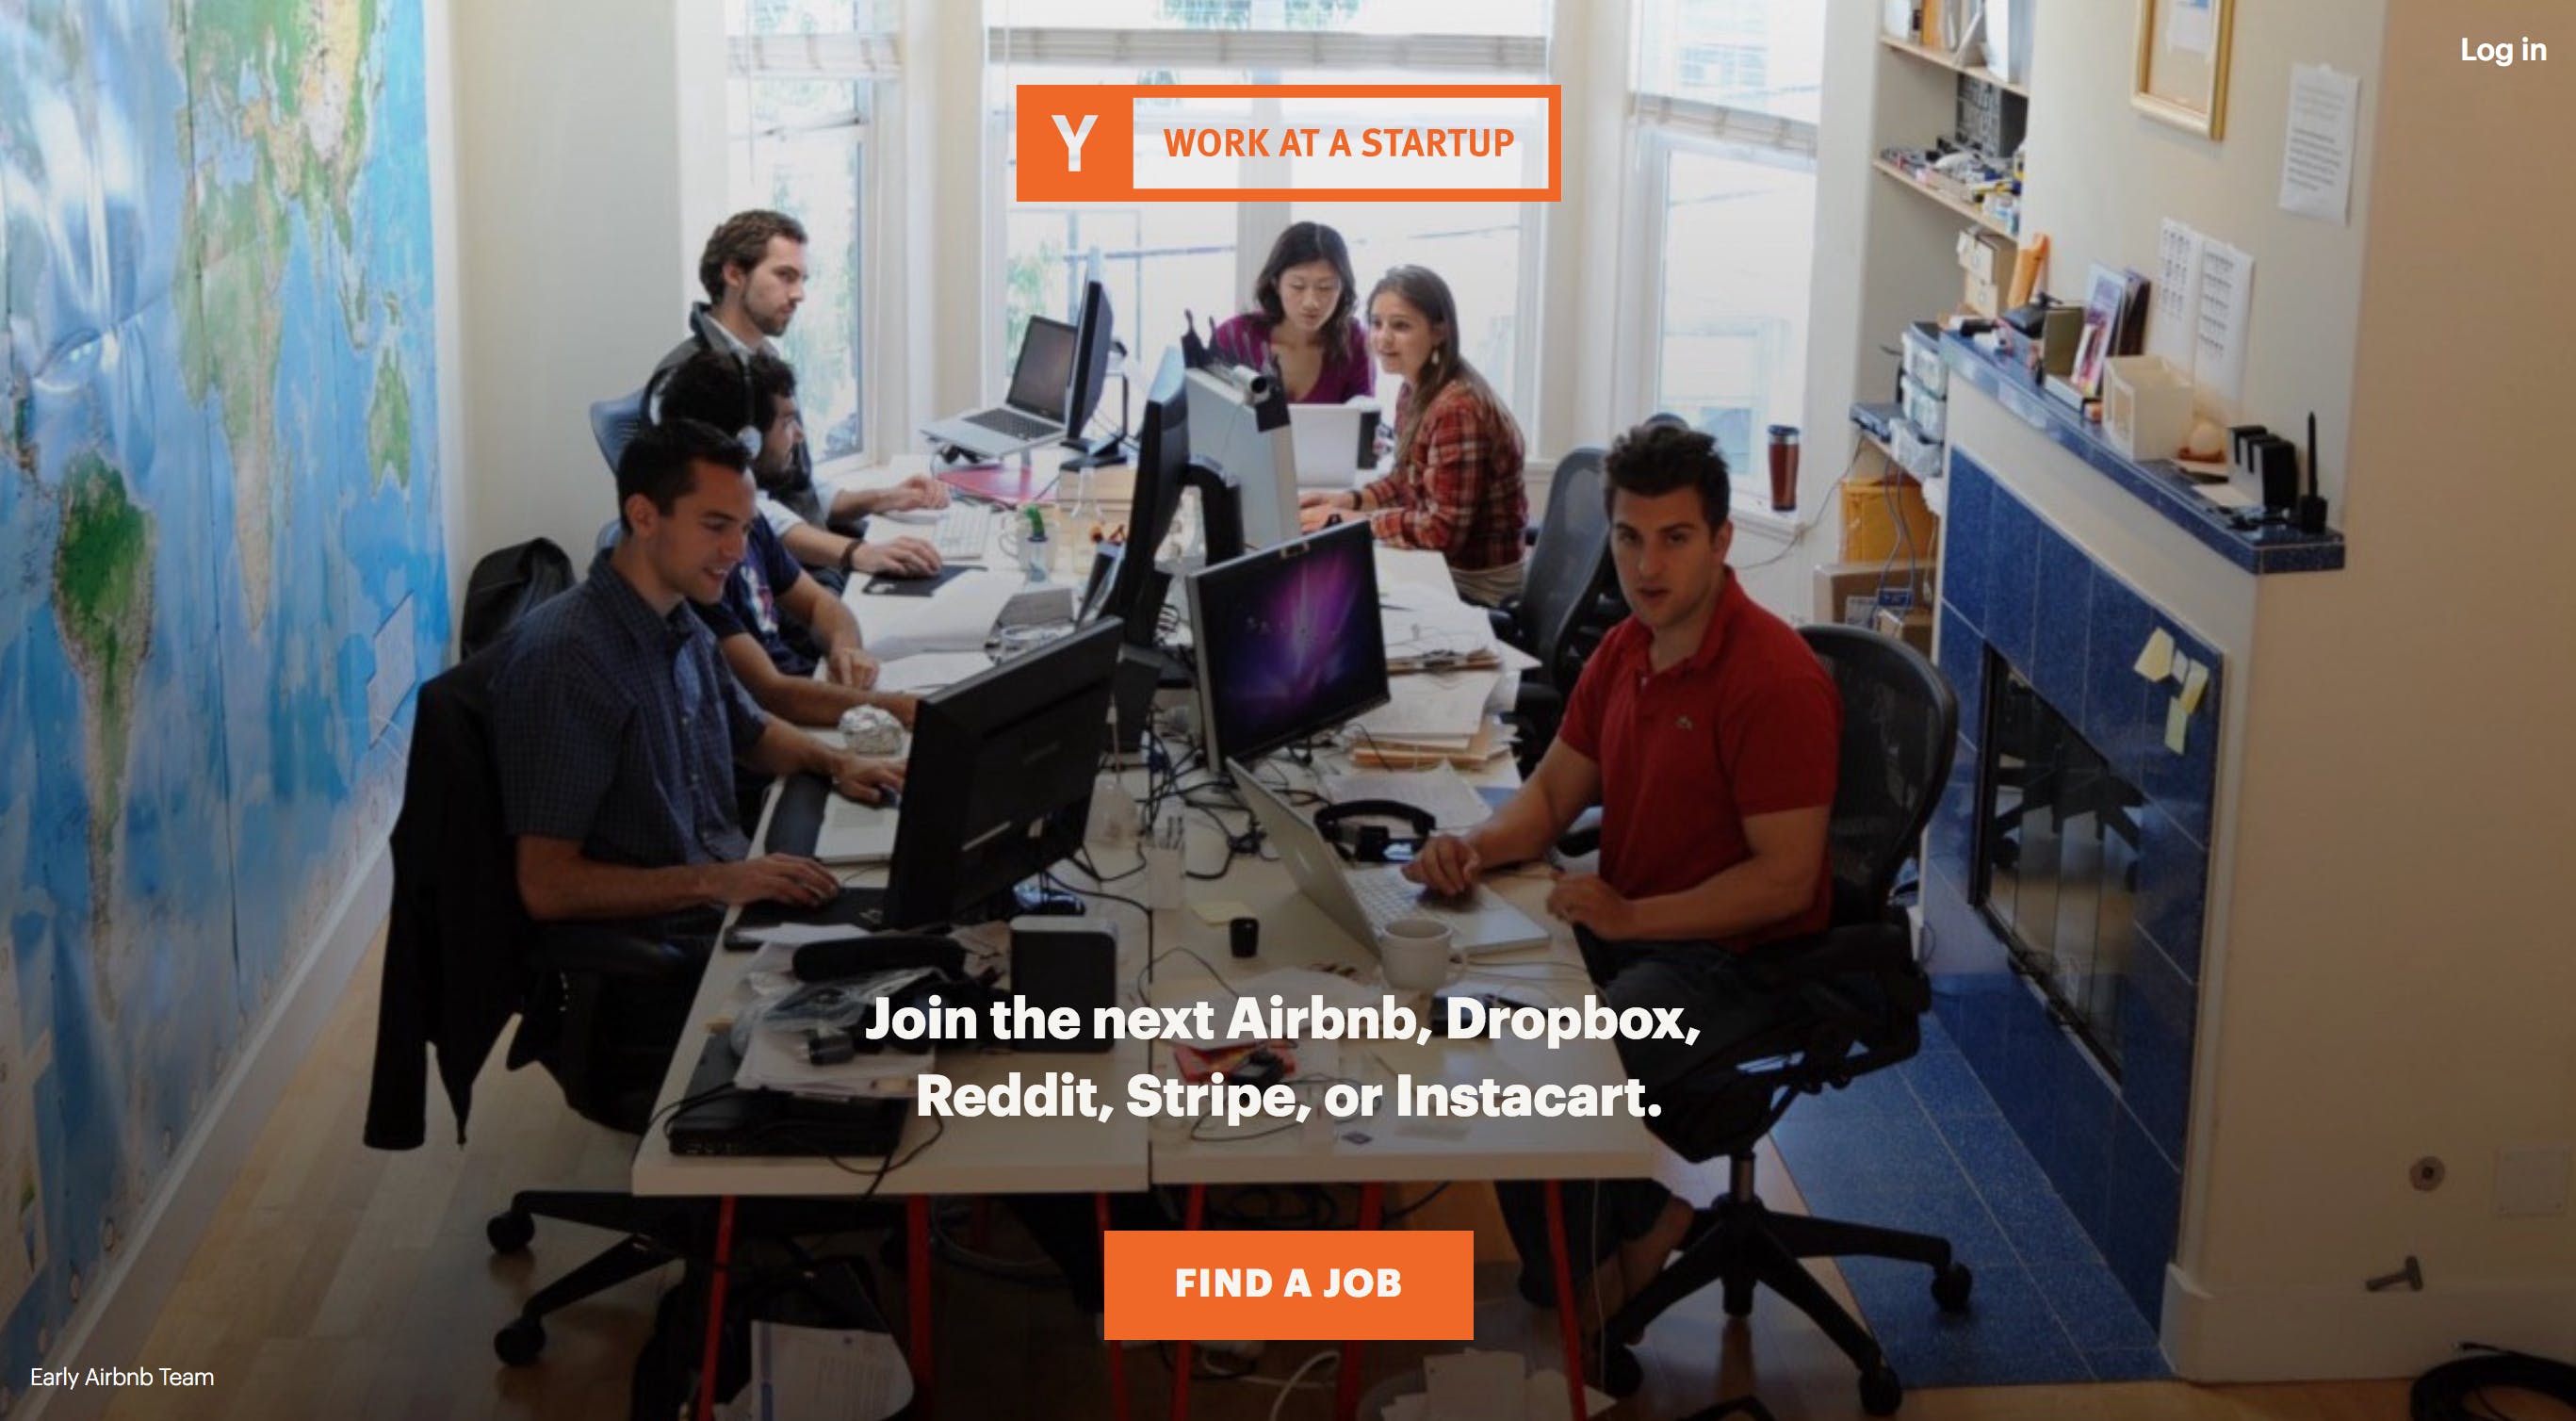 Work at a Startup - from Y Combinator media 3